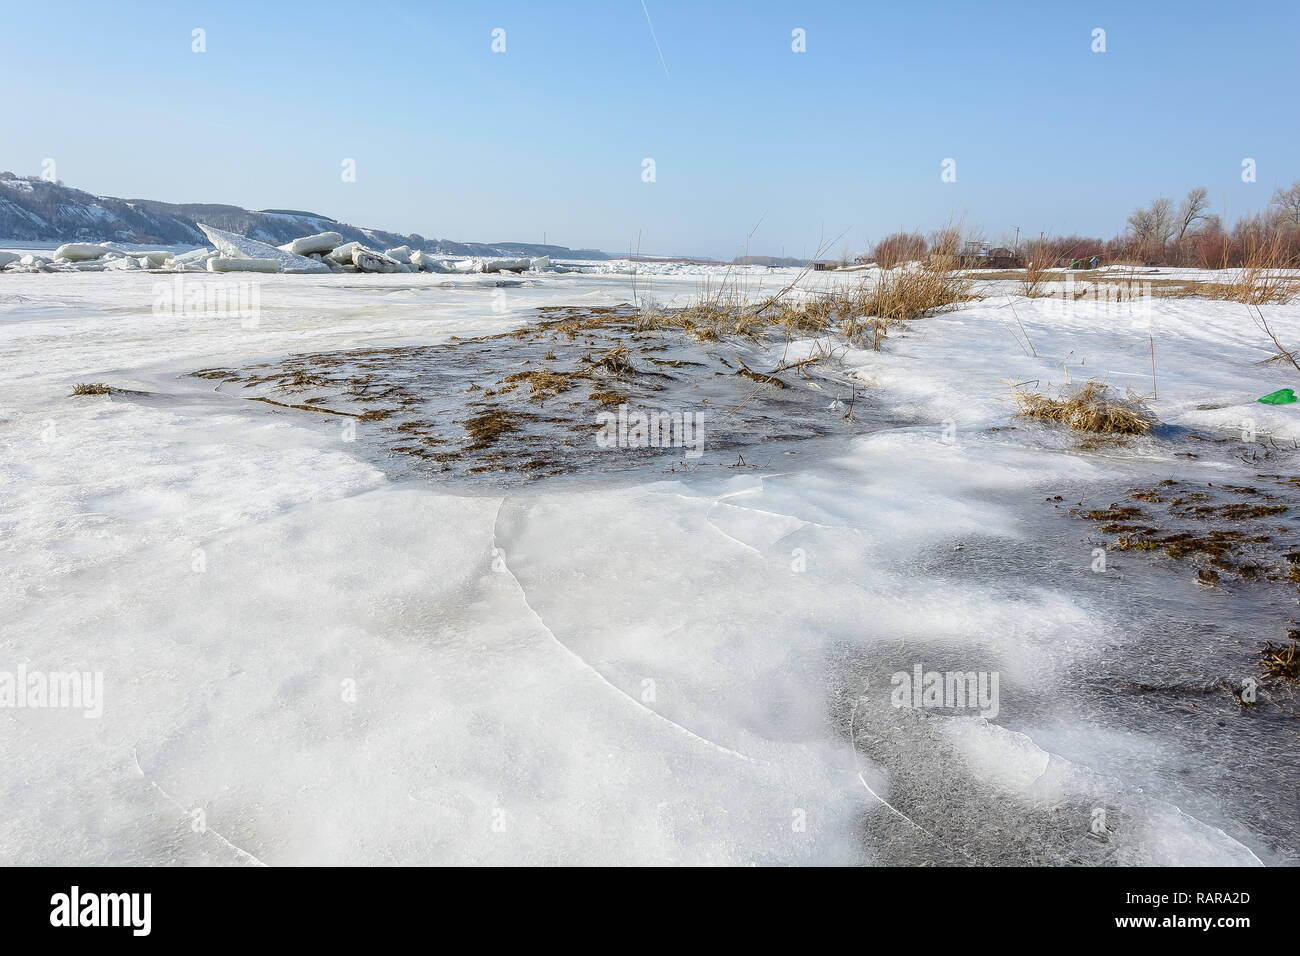 The snow and ice off the shore Stock Photo